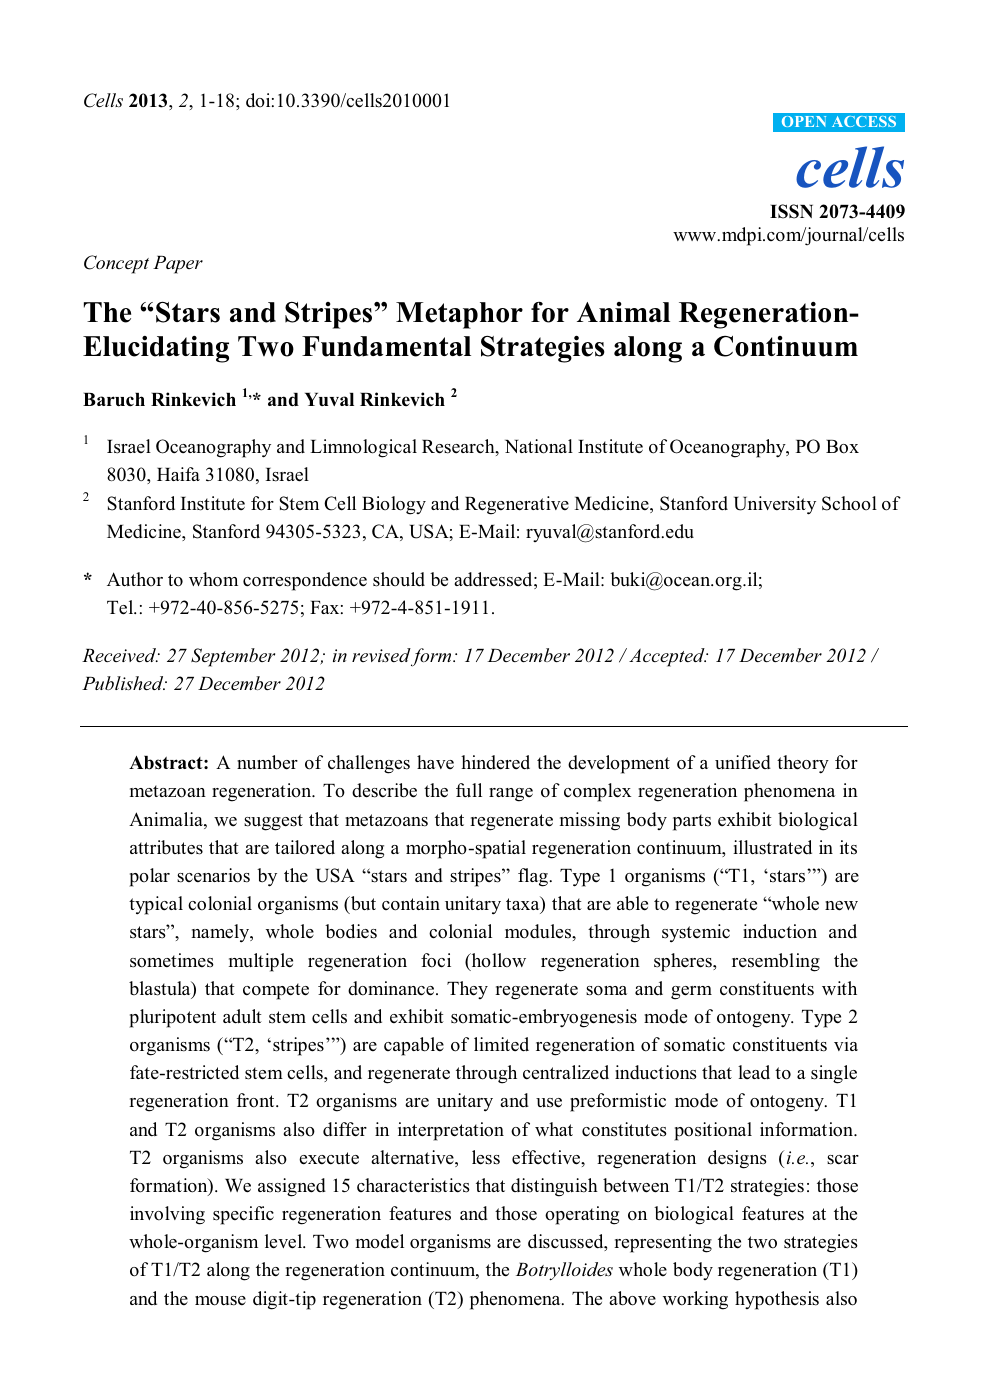 The Stars And Stripes Metaphor For Animal Regeneration Elucidating Two Fundamental Strategies Along A Continuum Topic Of Research Paper In Biological Sciences Download Scholarly Article Pdf And Read For Free On Cyberleninka